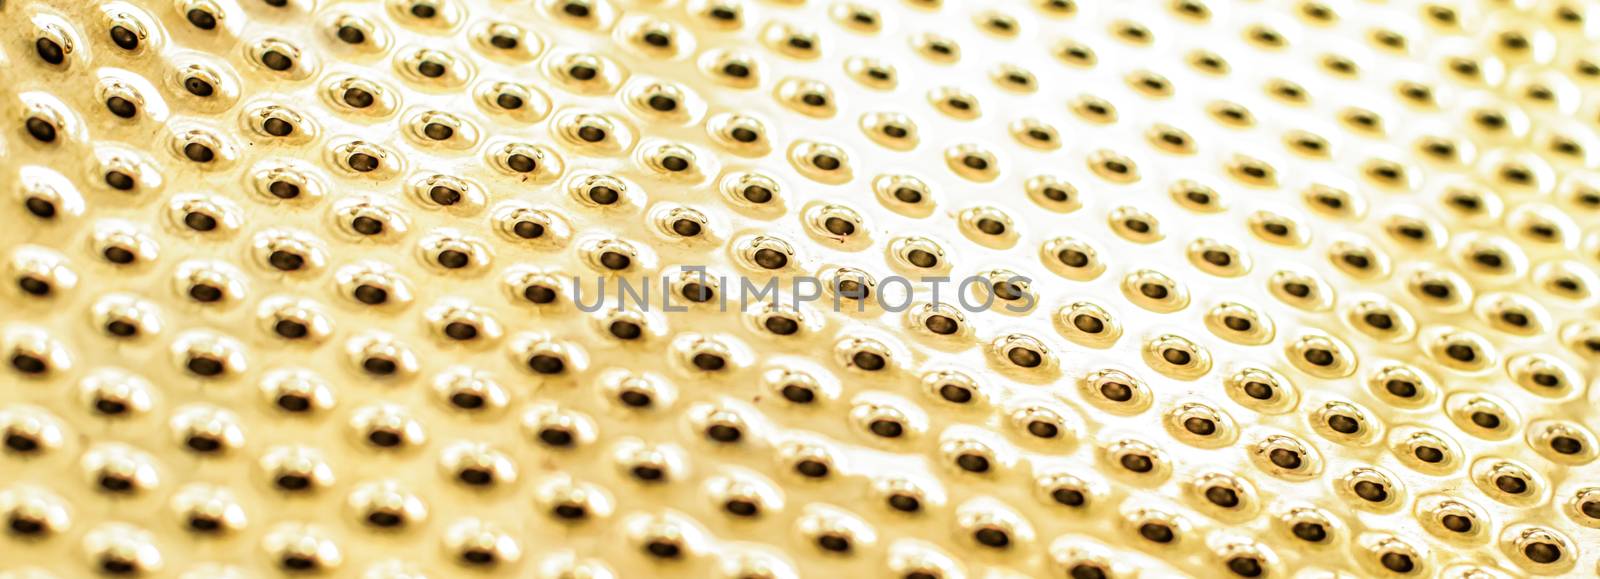 Texture of golden metallic surface as background, materials and interior design by Anneleven